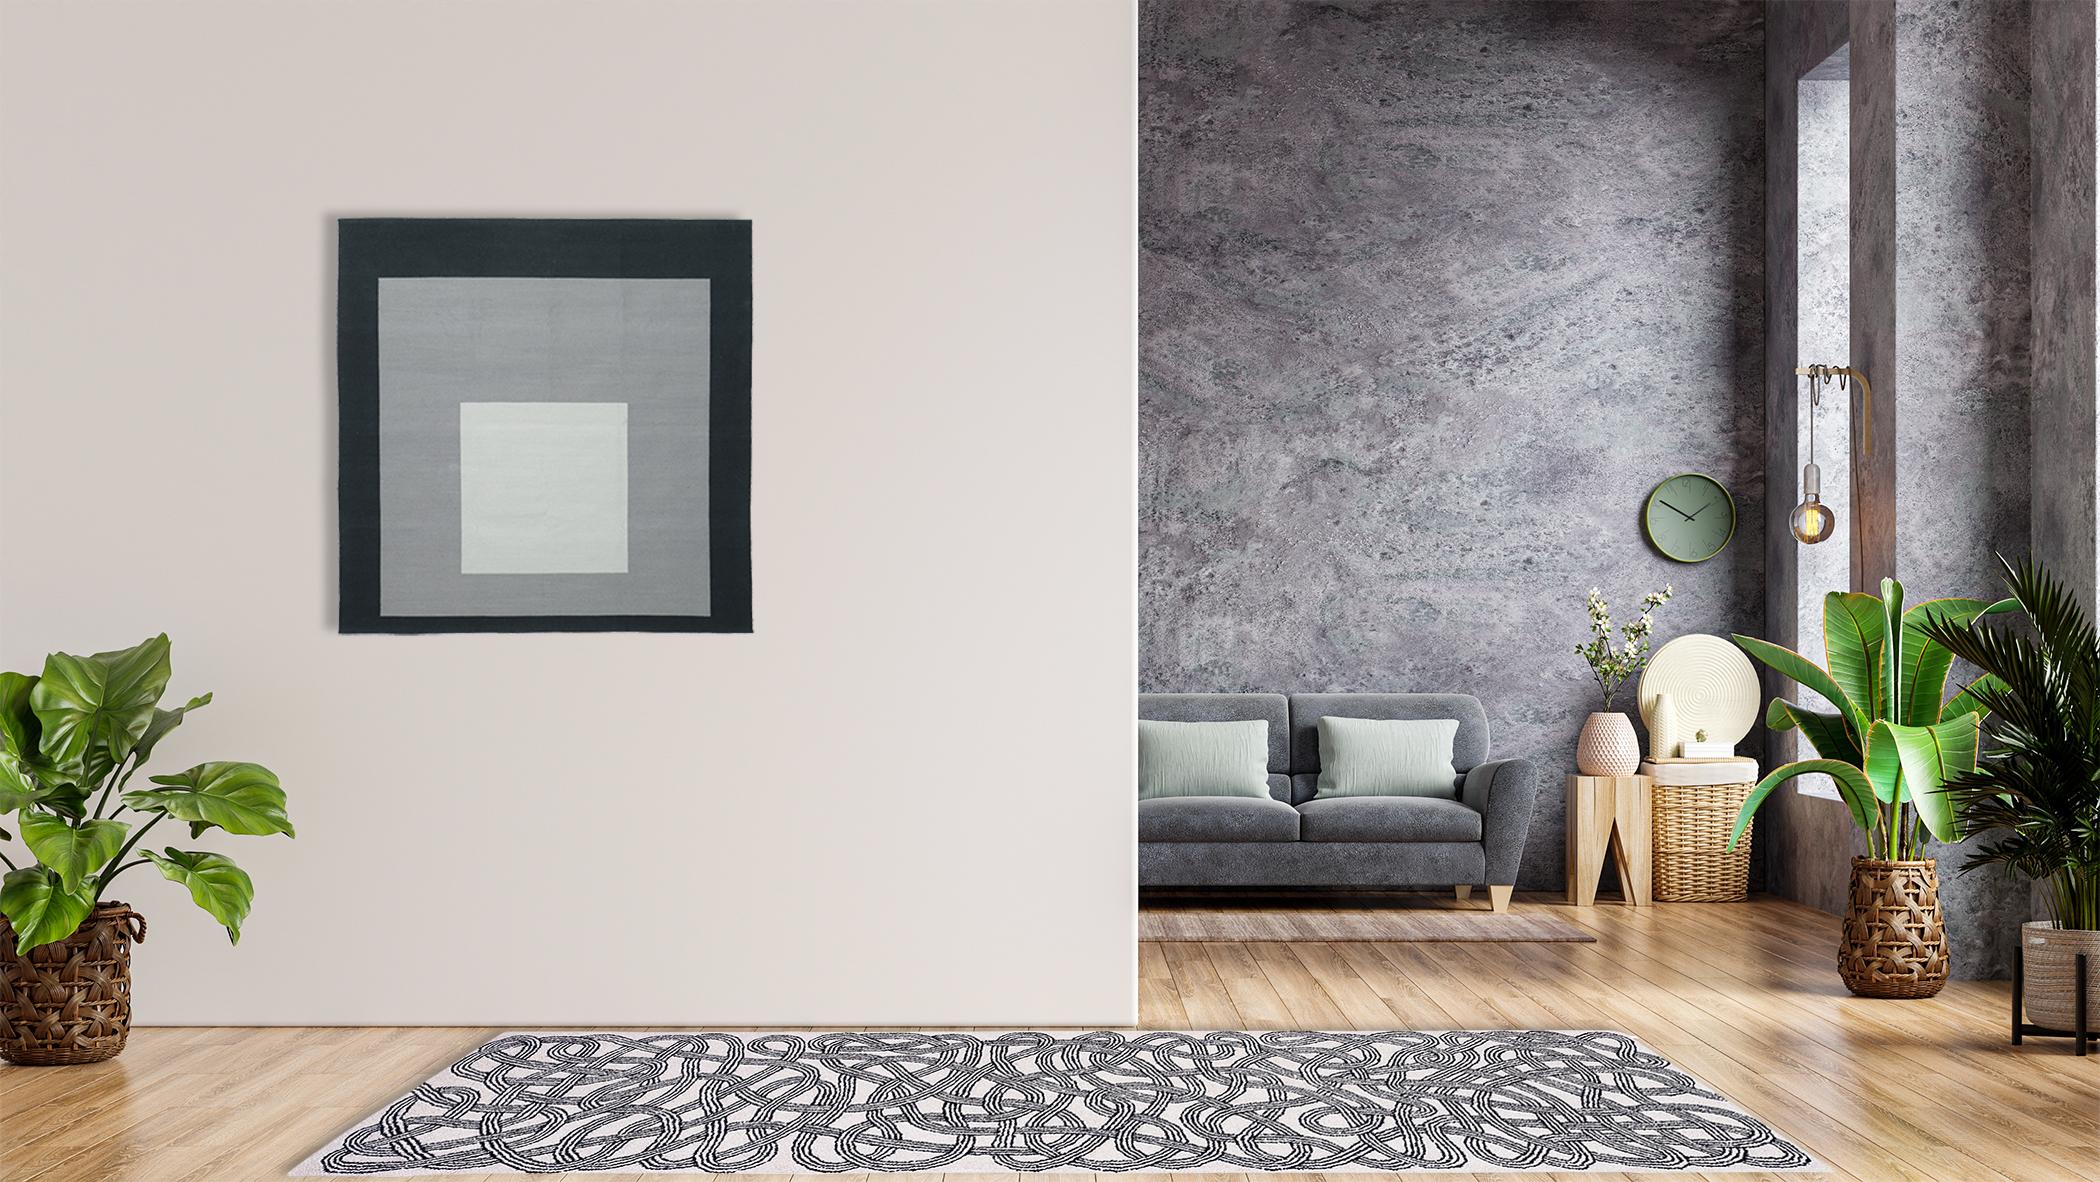 This classic, black and white hand-tufted wool runner by Anni Albers is adapted from a 1959 runner design and is available in two sizes. The piece features an enticing lattice of loosely woven laces that creates a friendly, energetic design perfect